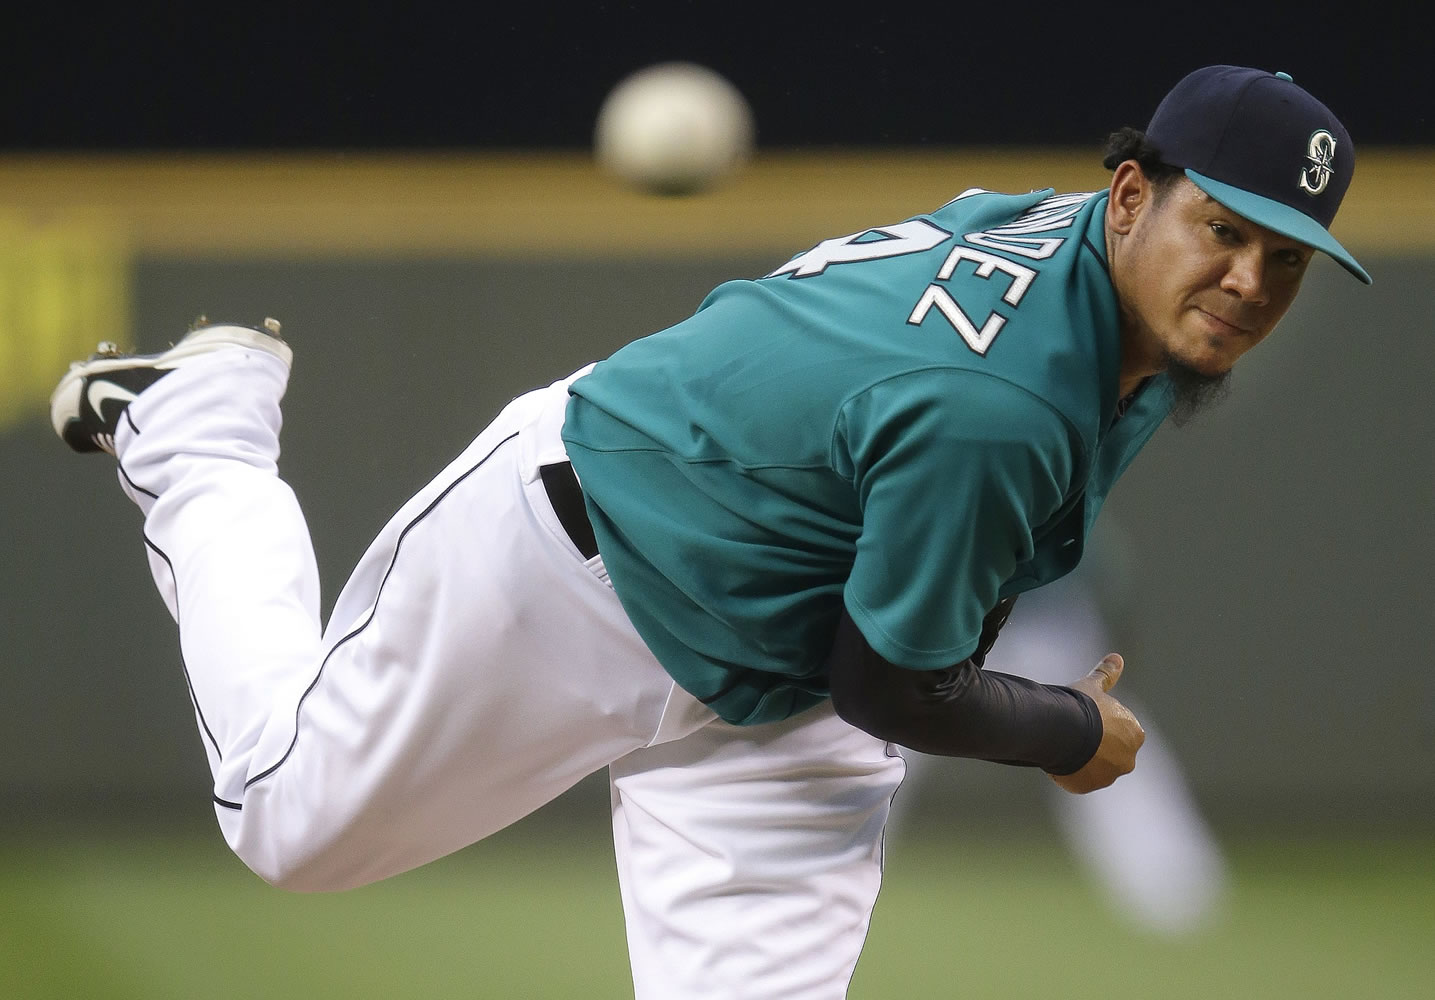 Seattle Mariners starting pitcher Felix Hernandez allowed one run in seven strong innings against theToronto Blue Jays on Monday, Aug. 11, 2014, in Seattle. The Mariners won the game 11-1. (AP Photo/Ted S.